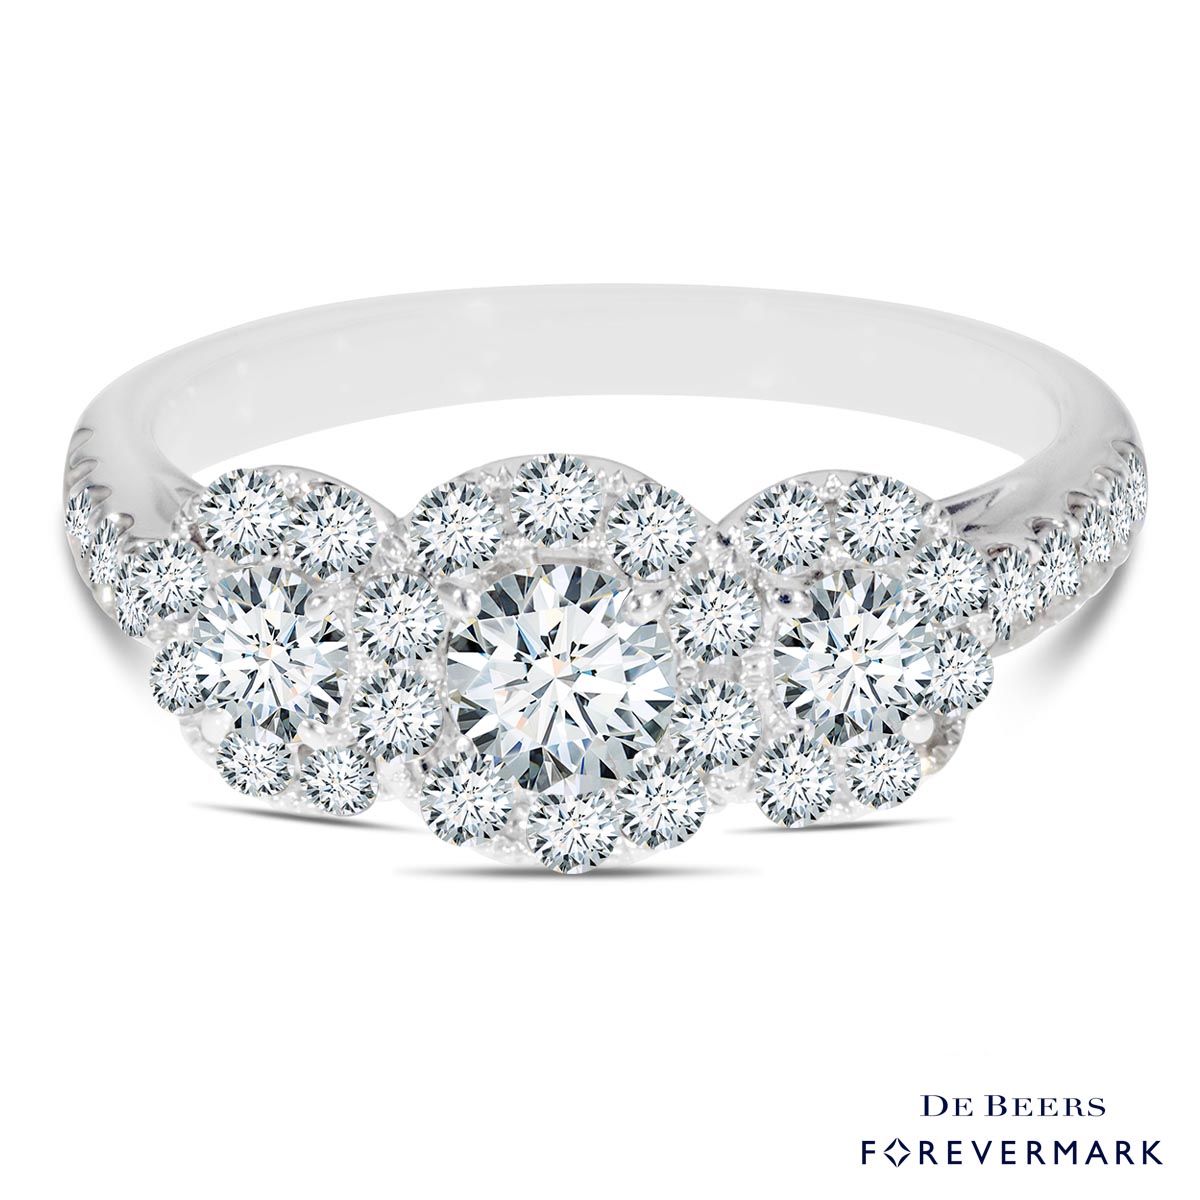 De Beers Forevermark Center of My Universe Diamond Three Stone Halo Ring in 18kt White Gold (1 1/7ct tw)